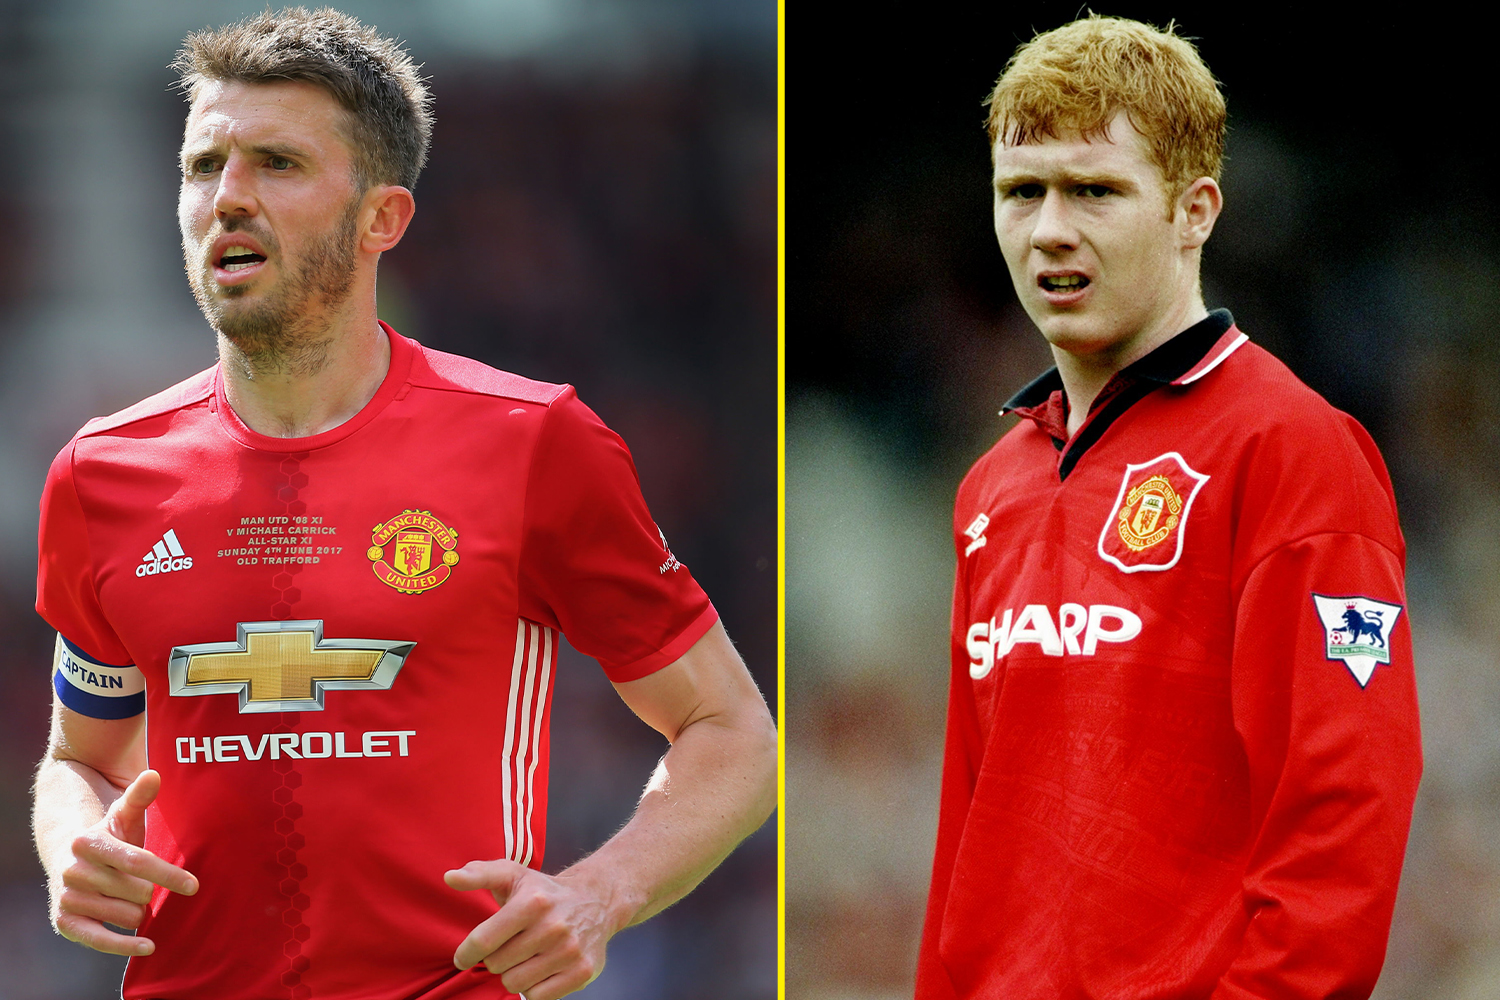 Tom Cleverley reveals jealousy of Manchester United teammates Michael Carrick and Paul Scholes and season under David Moyes 'scarred' him